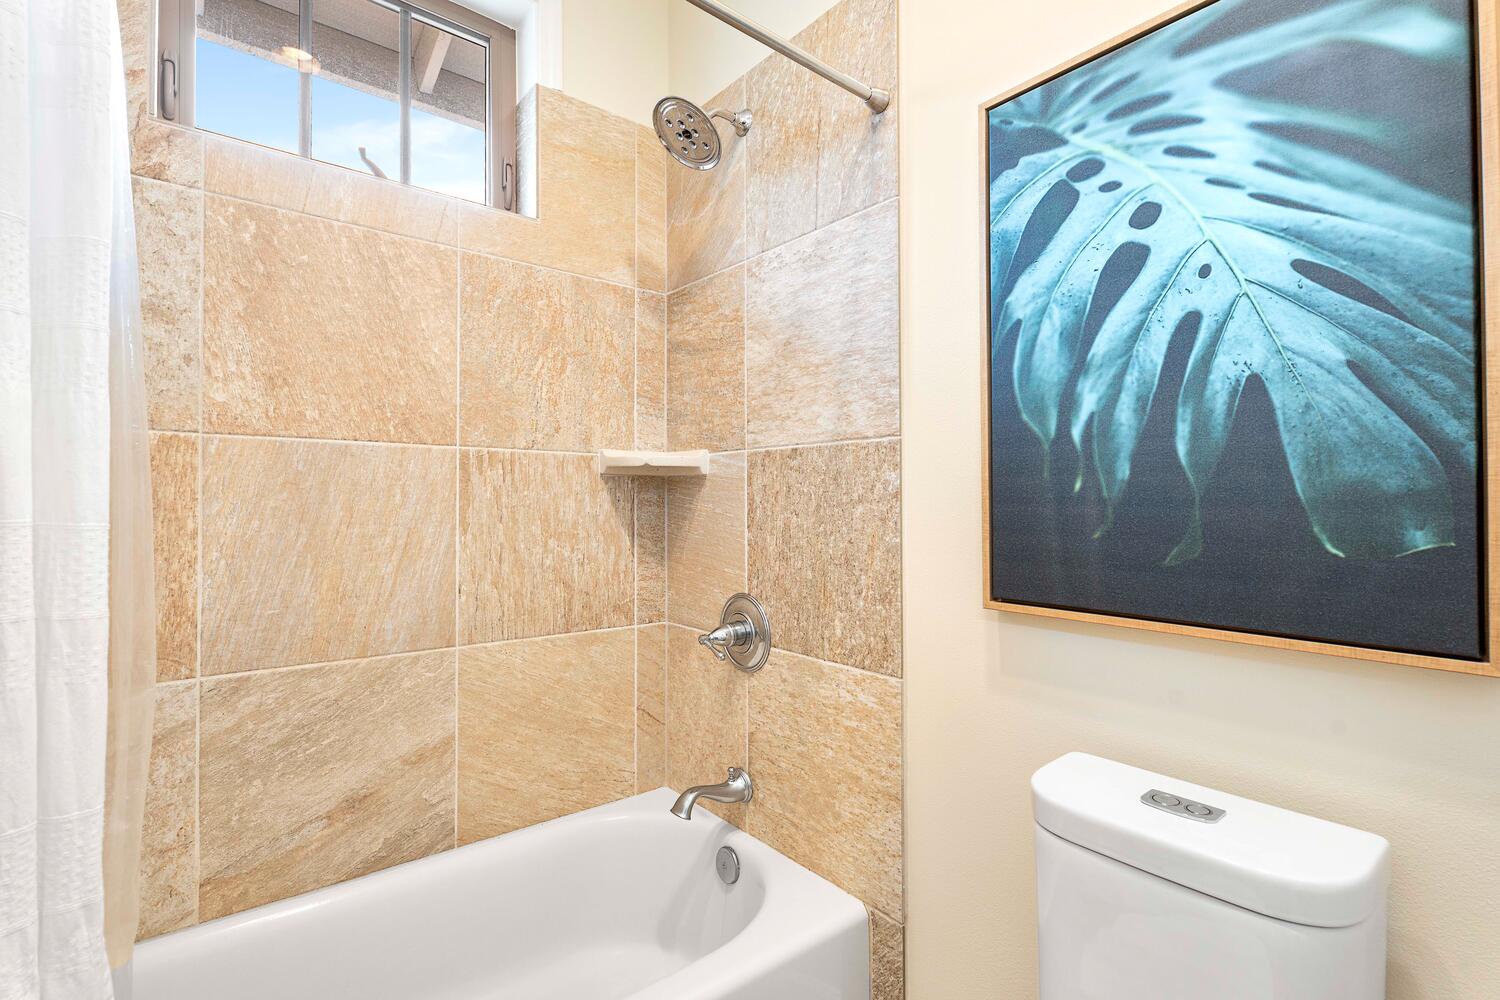 Kailua-Kona Vacation Rentals, Holua Kai #26 - Compact and modern full bathroom with artistic touches and tiled walls.